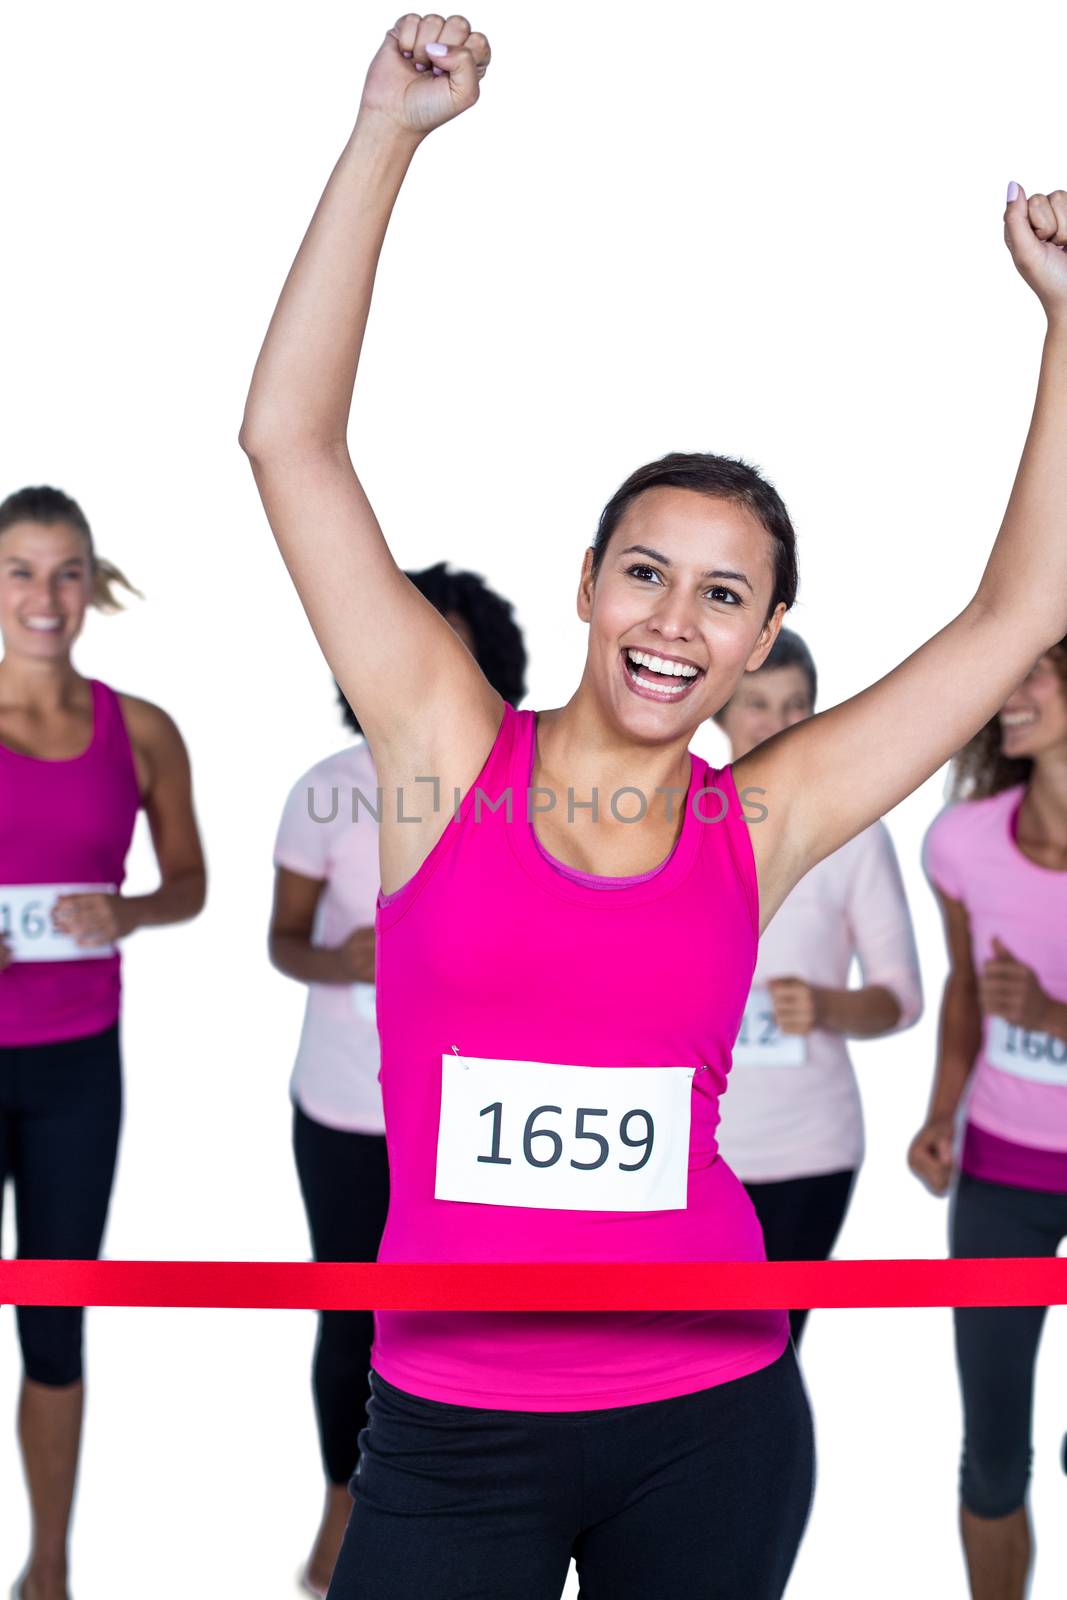 Smiling winner athlete crossing finish line with arms raised  by Wavebreakmedia